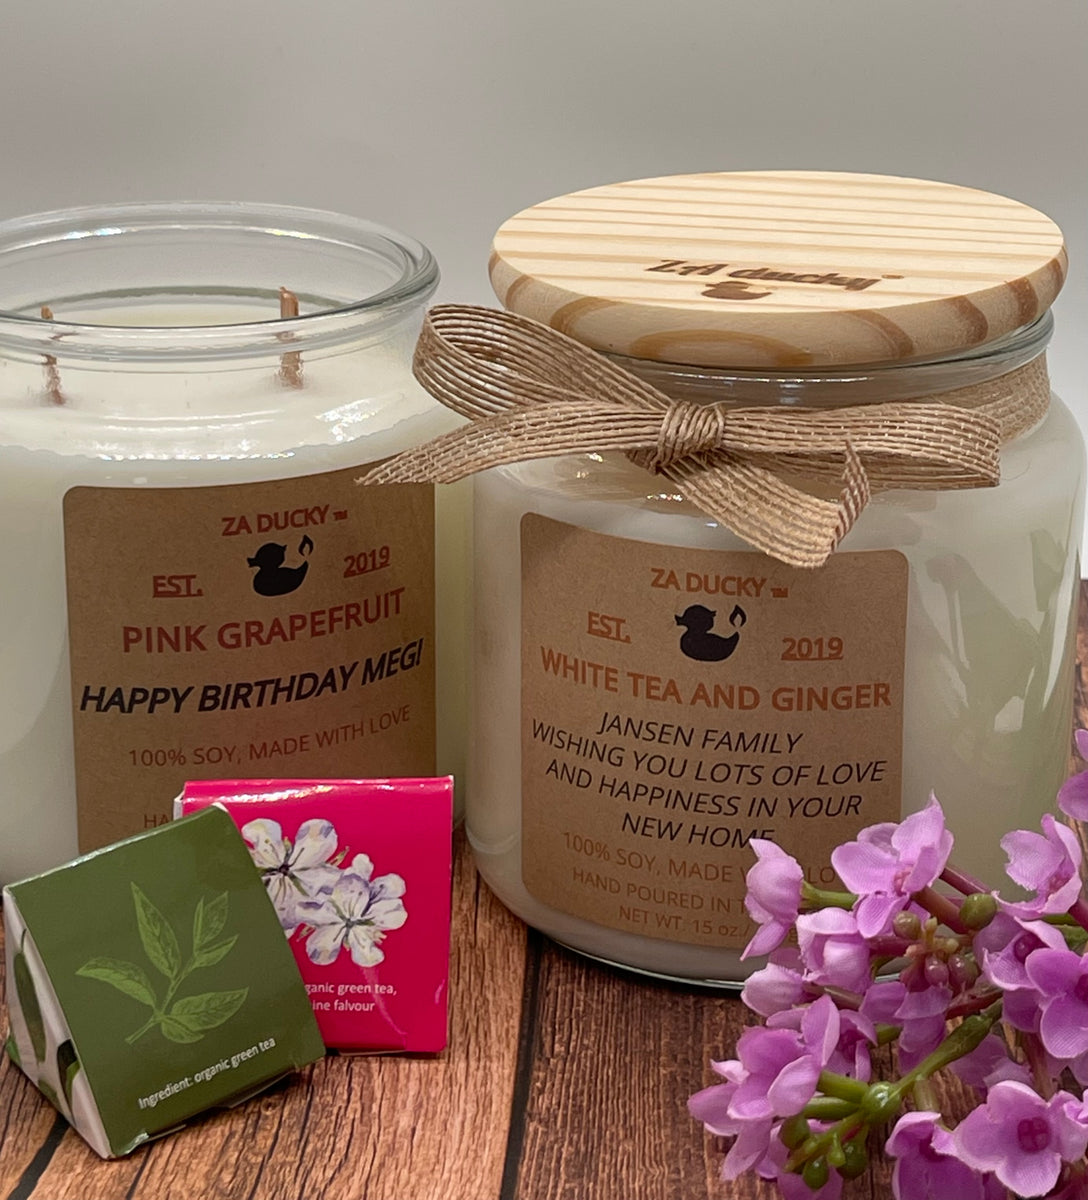 16 oz. wood lid jar soy wax candle net wt. 15 oz. /425g personalized candles adding small massage for free of charge. 